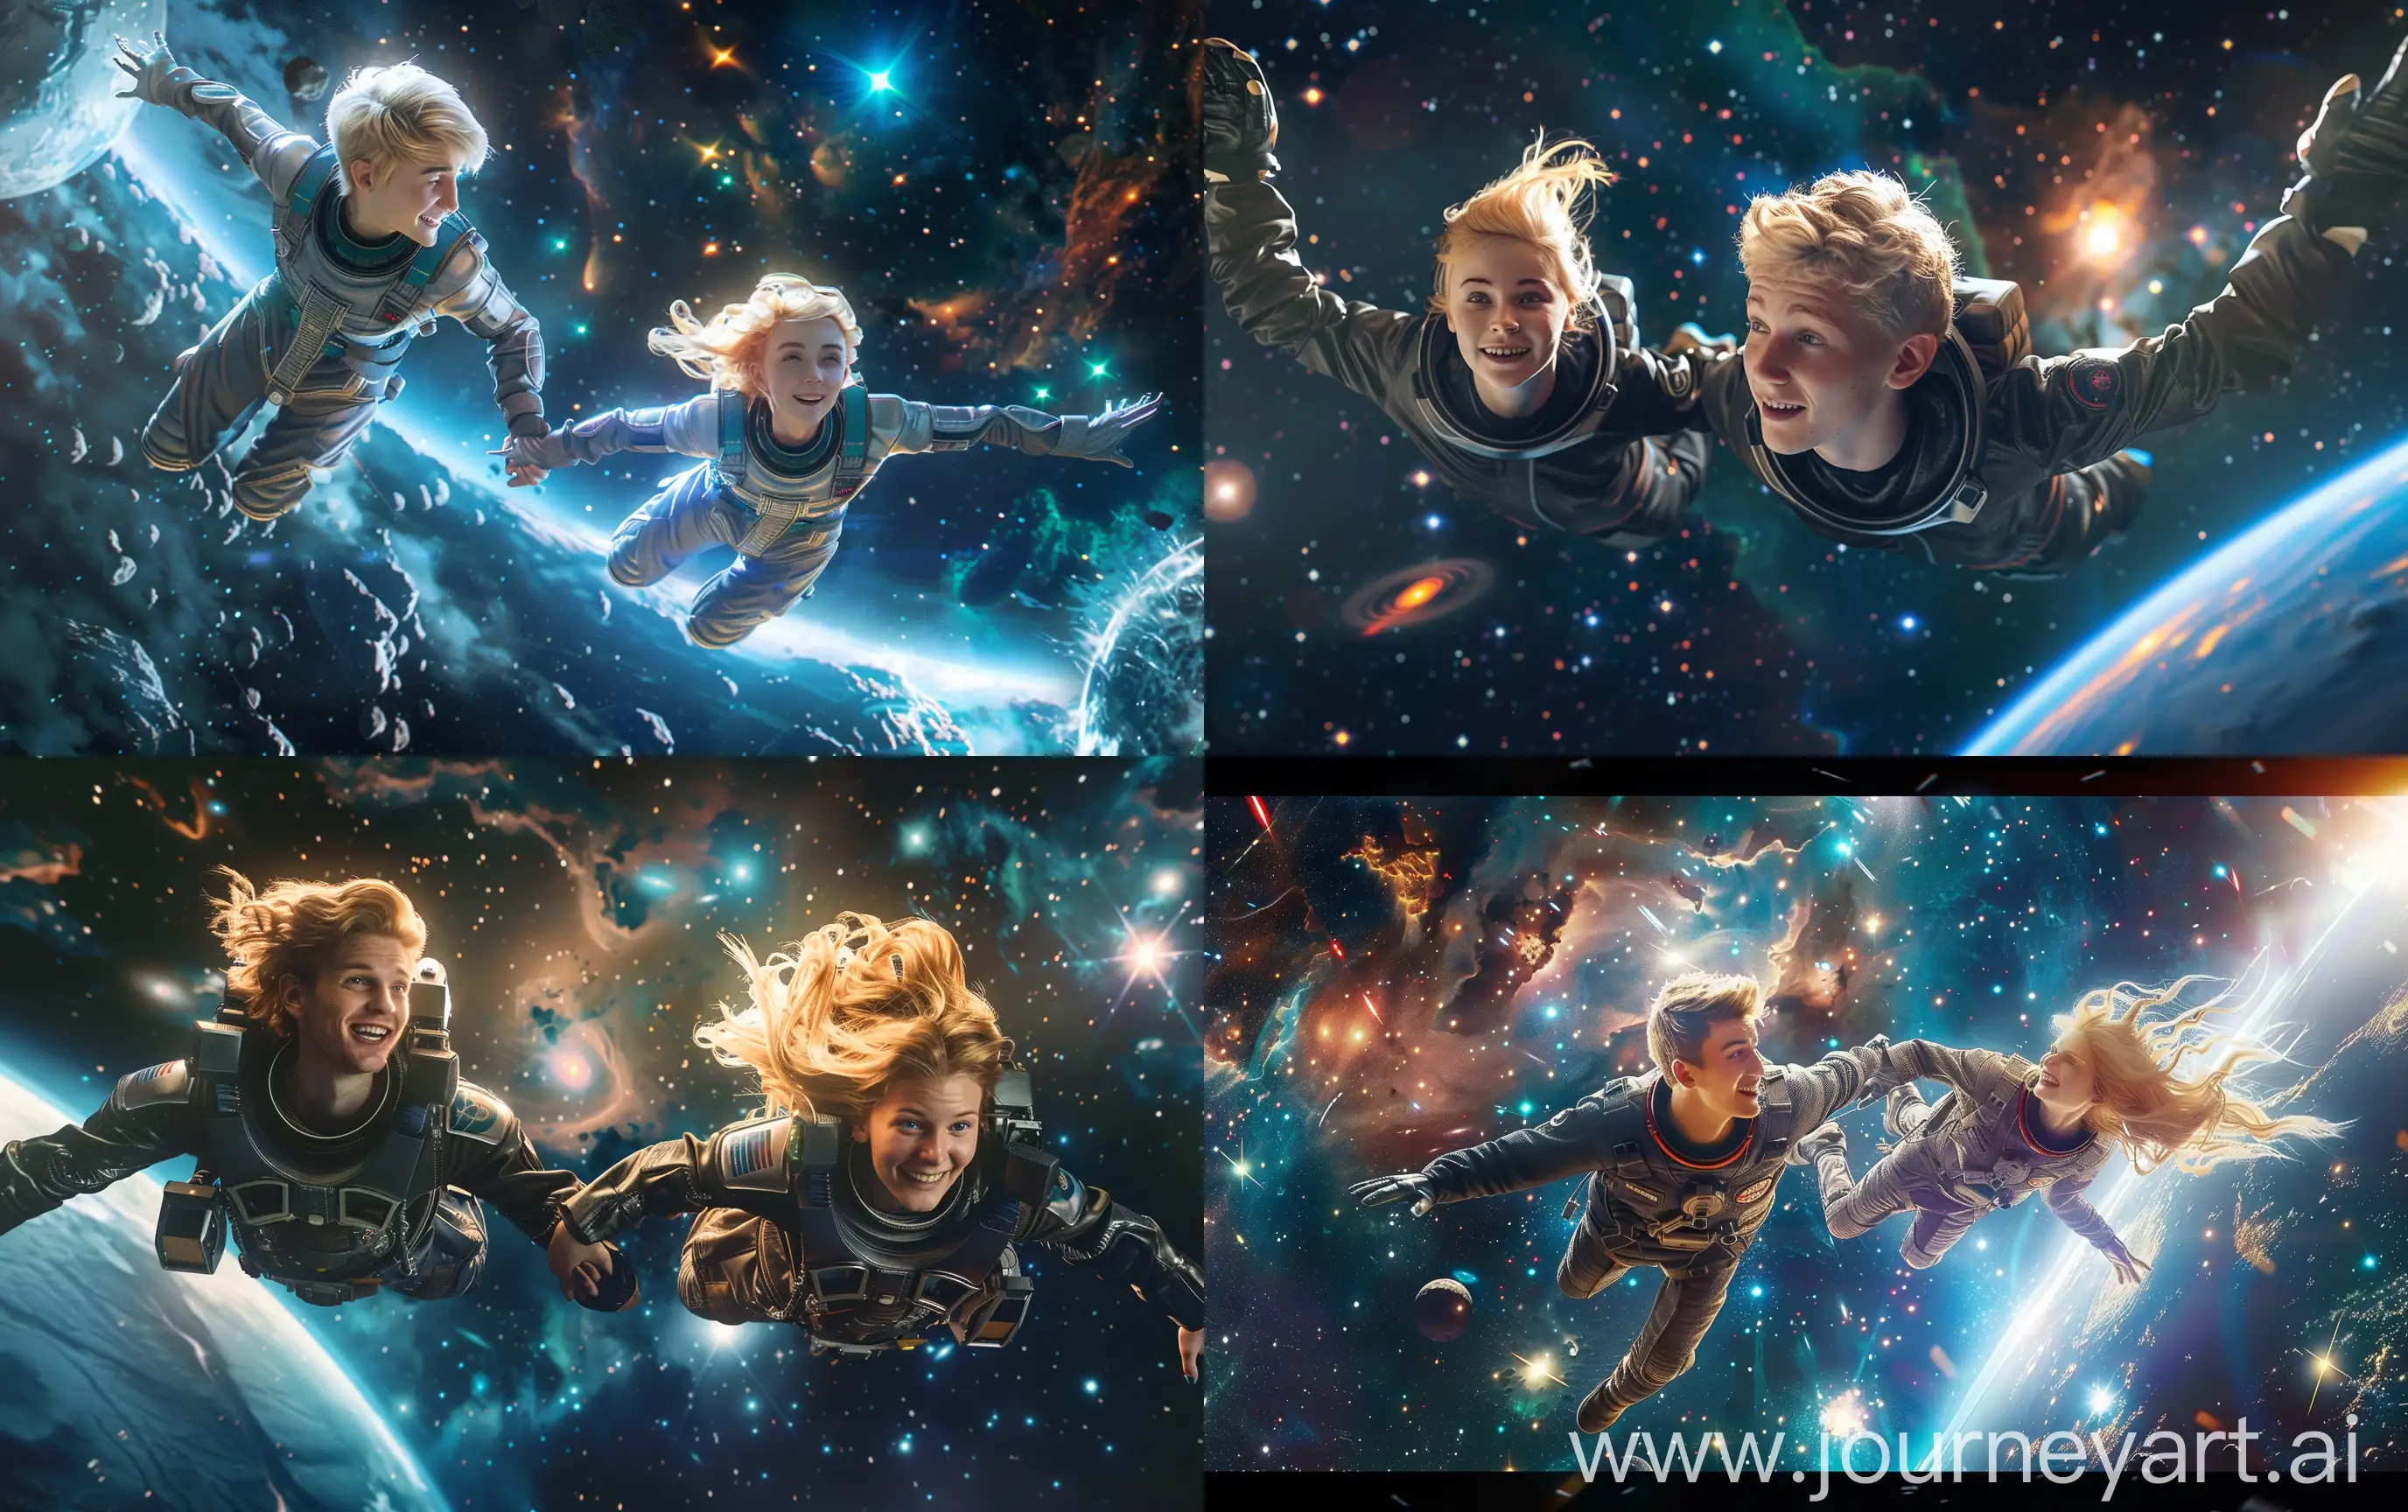 Young-Couples-Blissful-Space-Flight-Amidst-Cosmic-Splendor